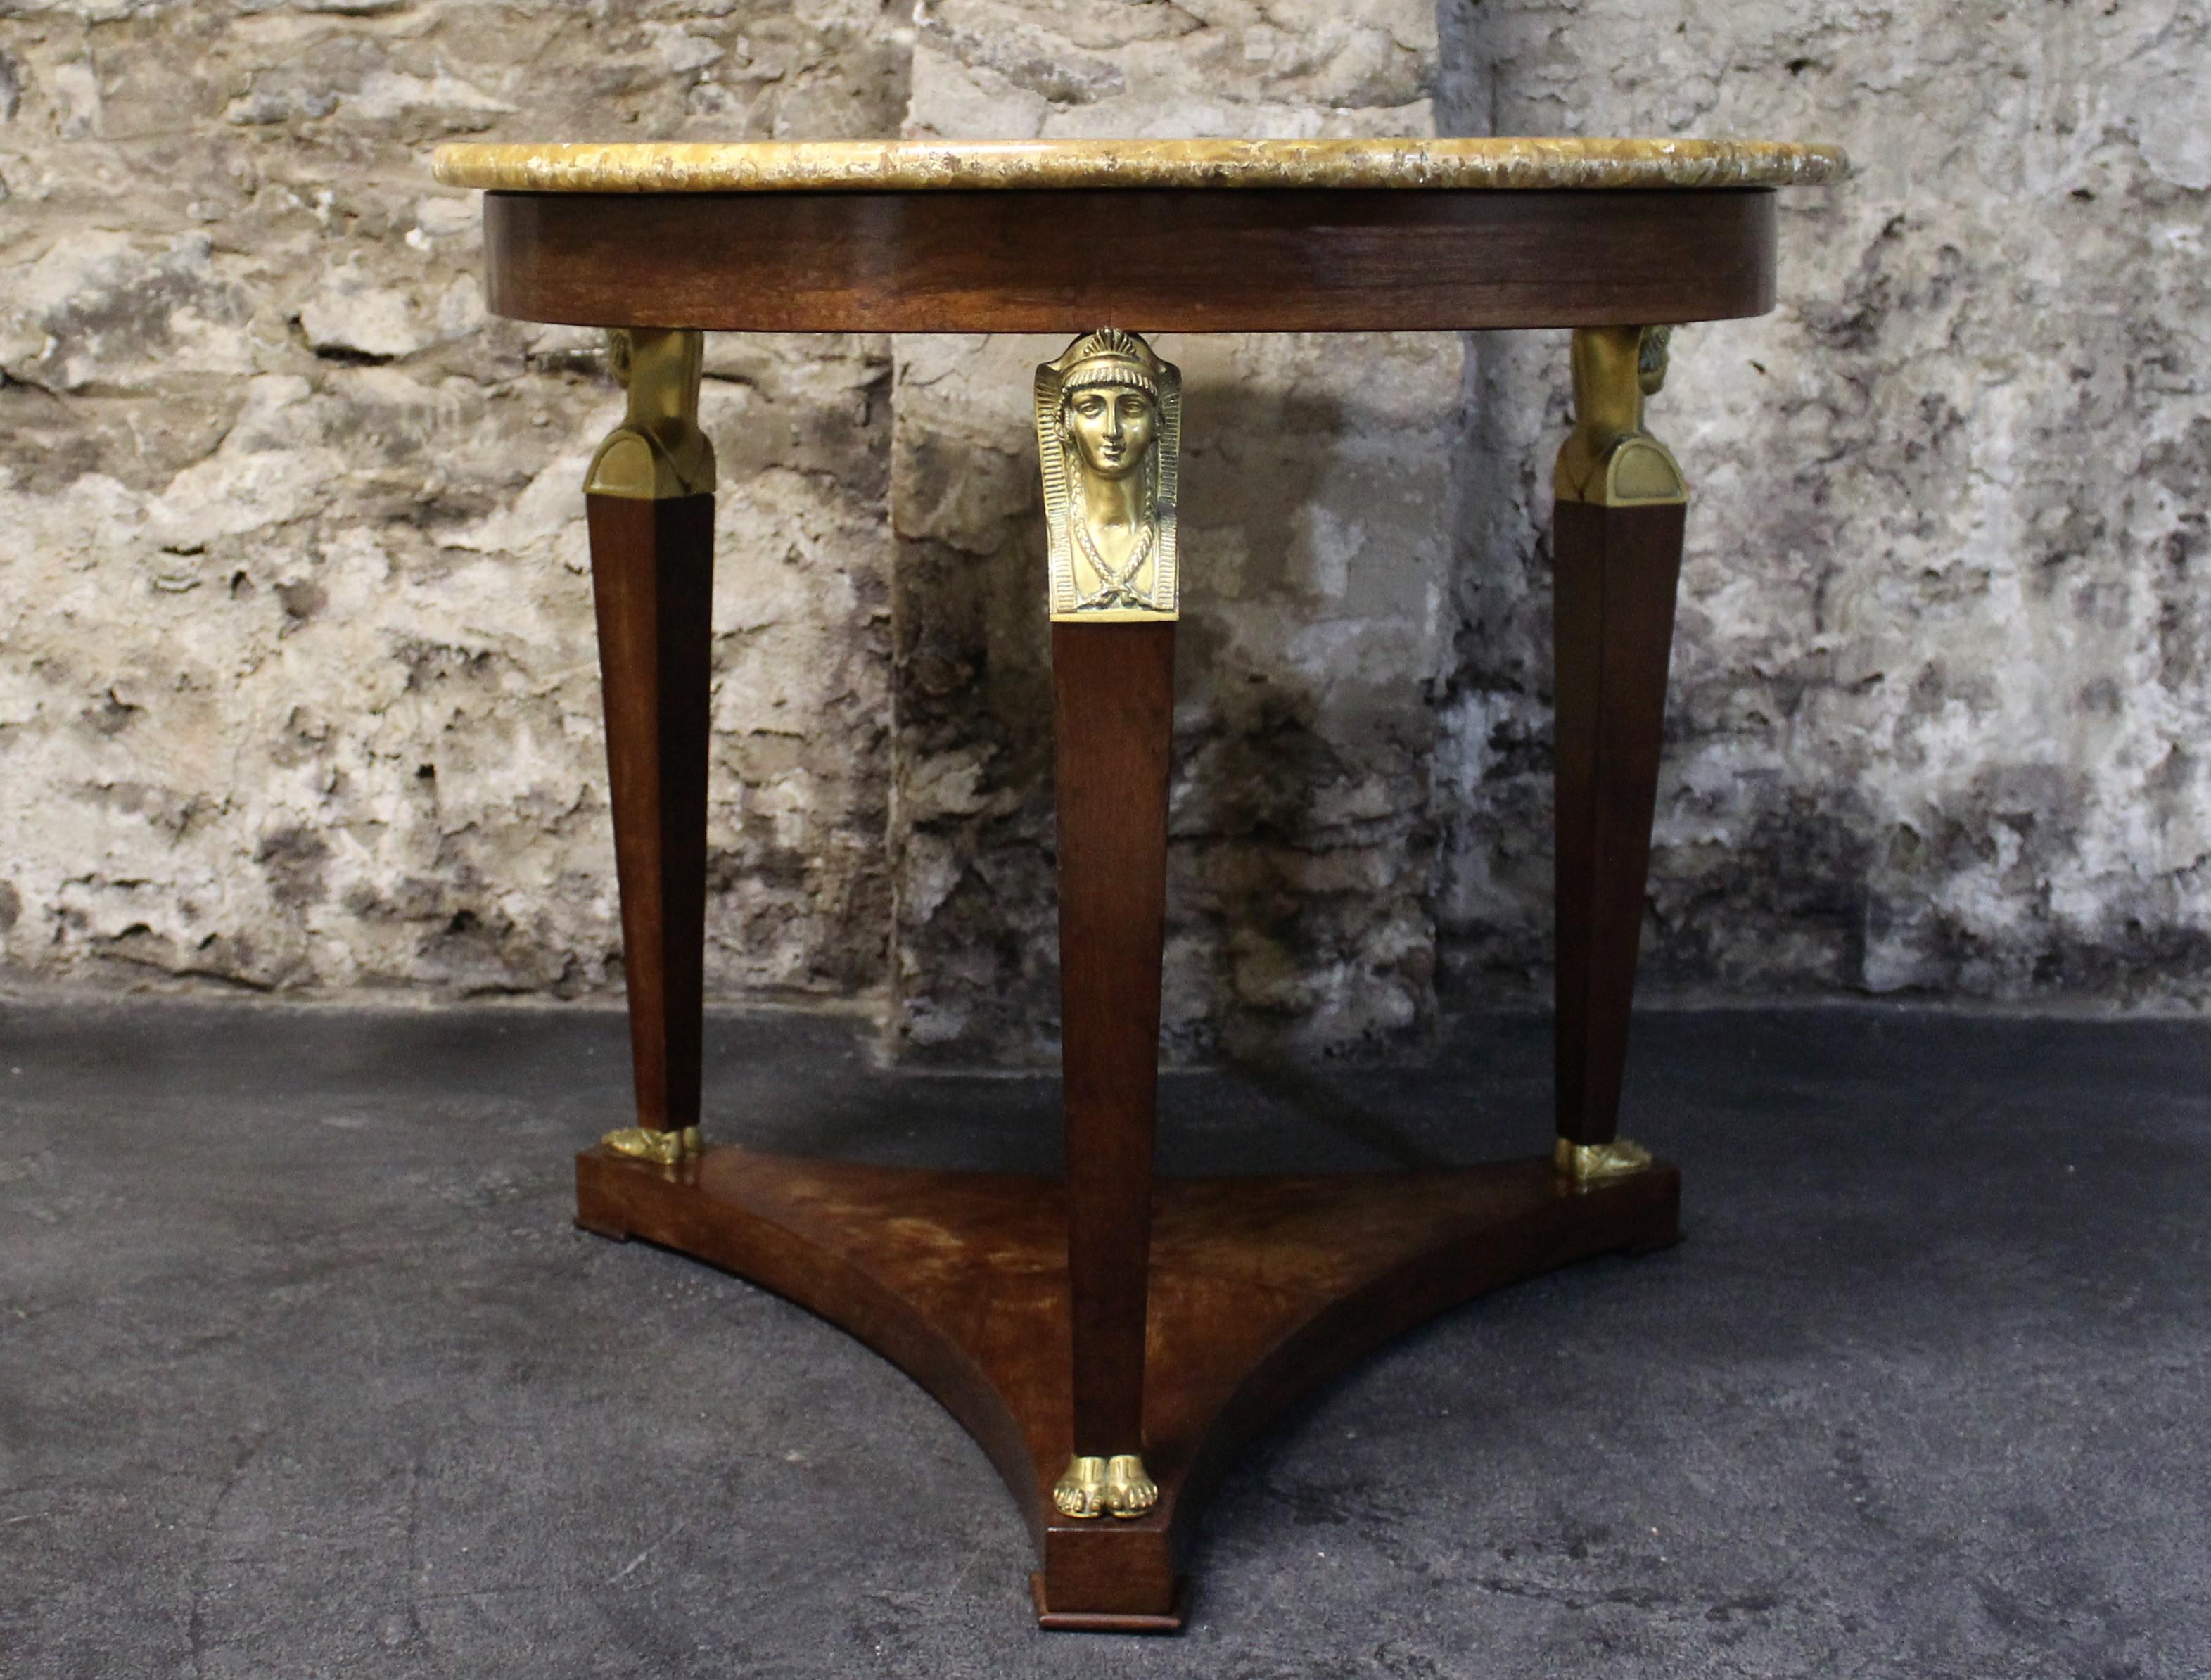 19th century, French Empire mahogany center table with gilt bronze caryatids supporting onyx top.